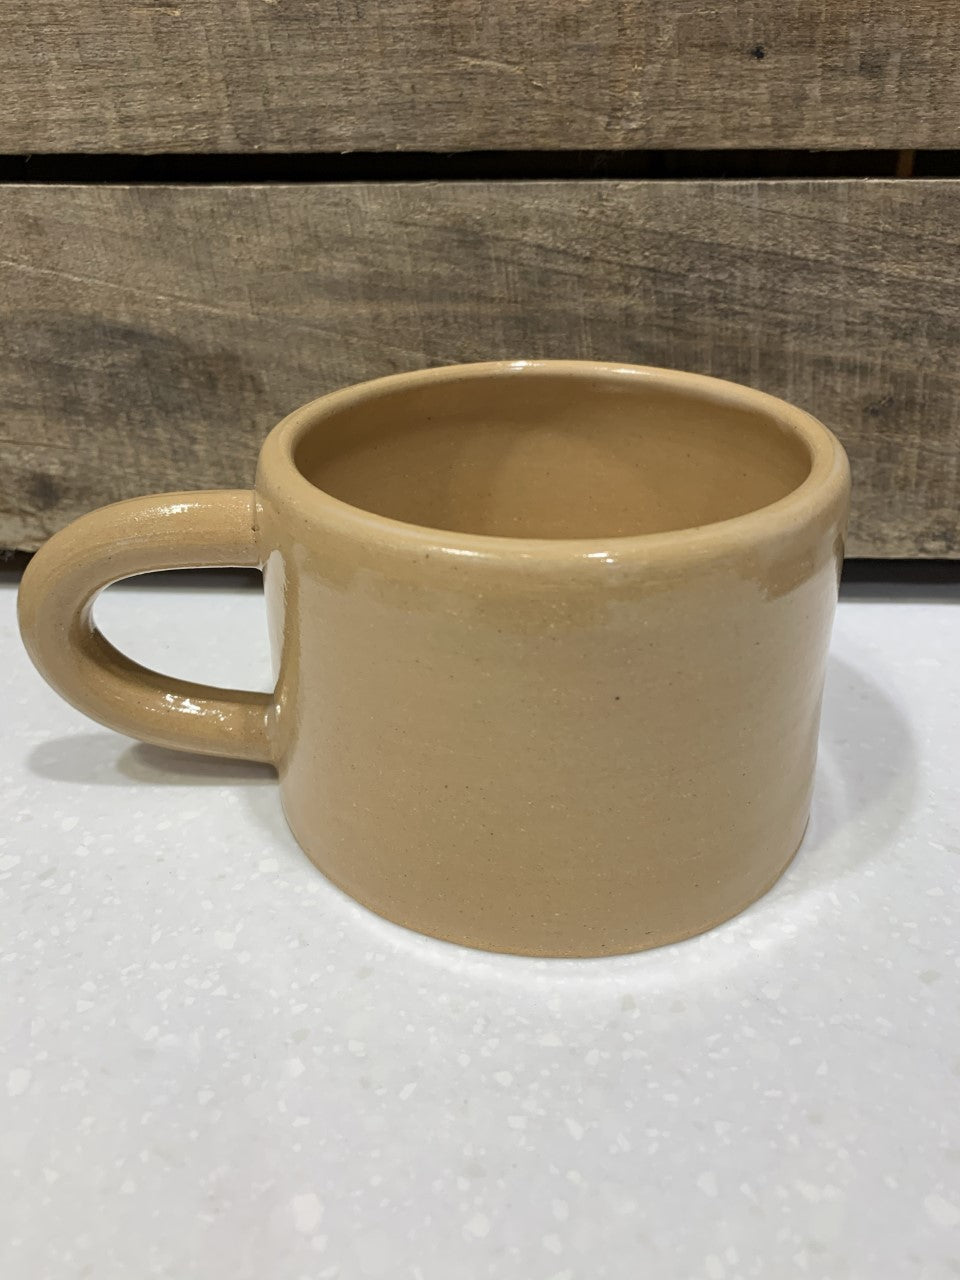 This item is hand made on the wheel so please expect slight variations in size, shape and surface pattern! It is made using food safe clay and glazes!  Made by Tellefsen Atelier in Middletown, NY.